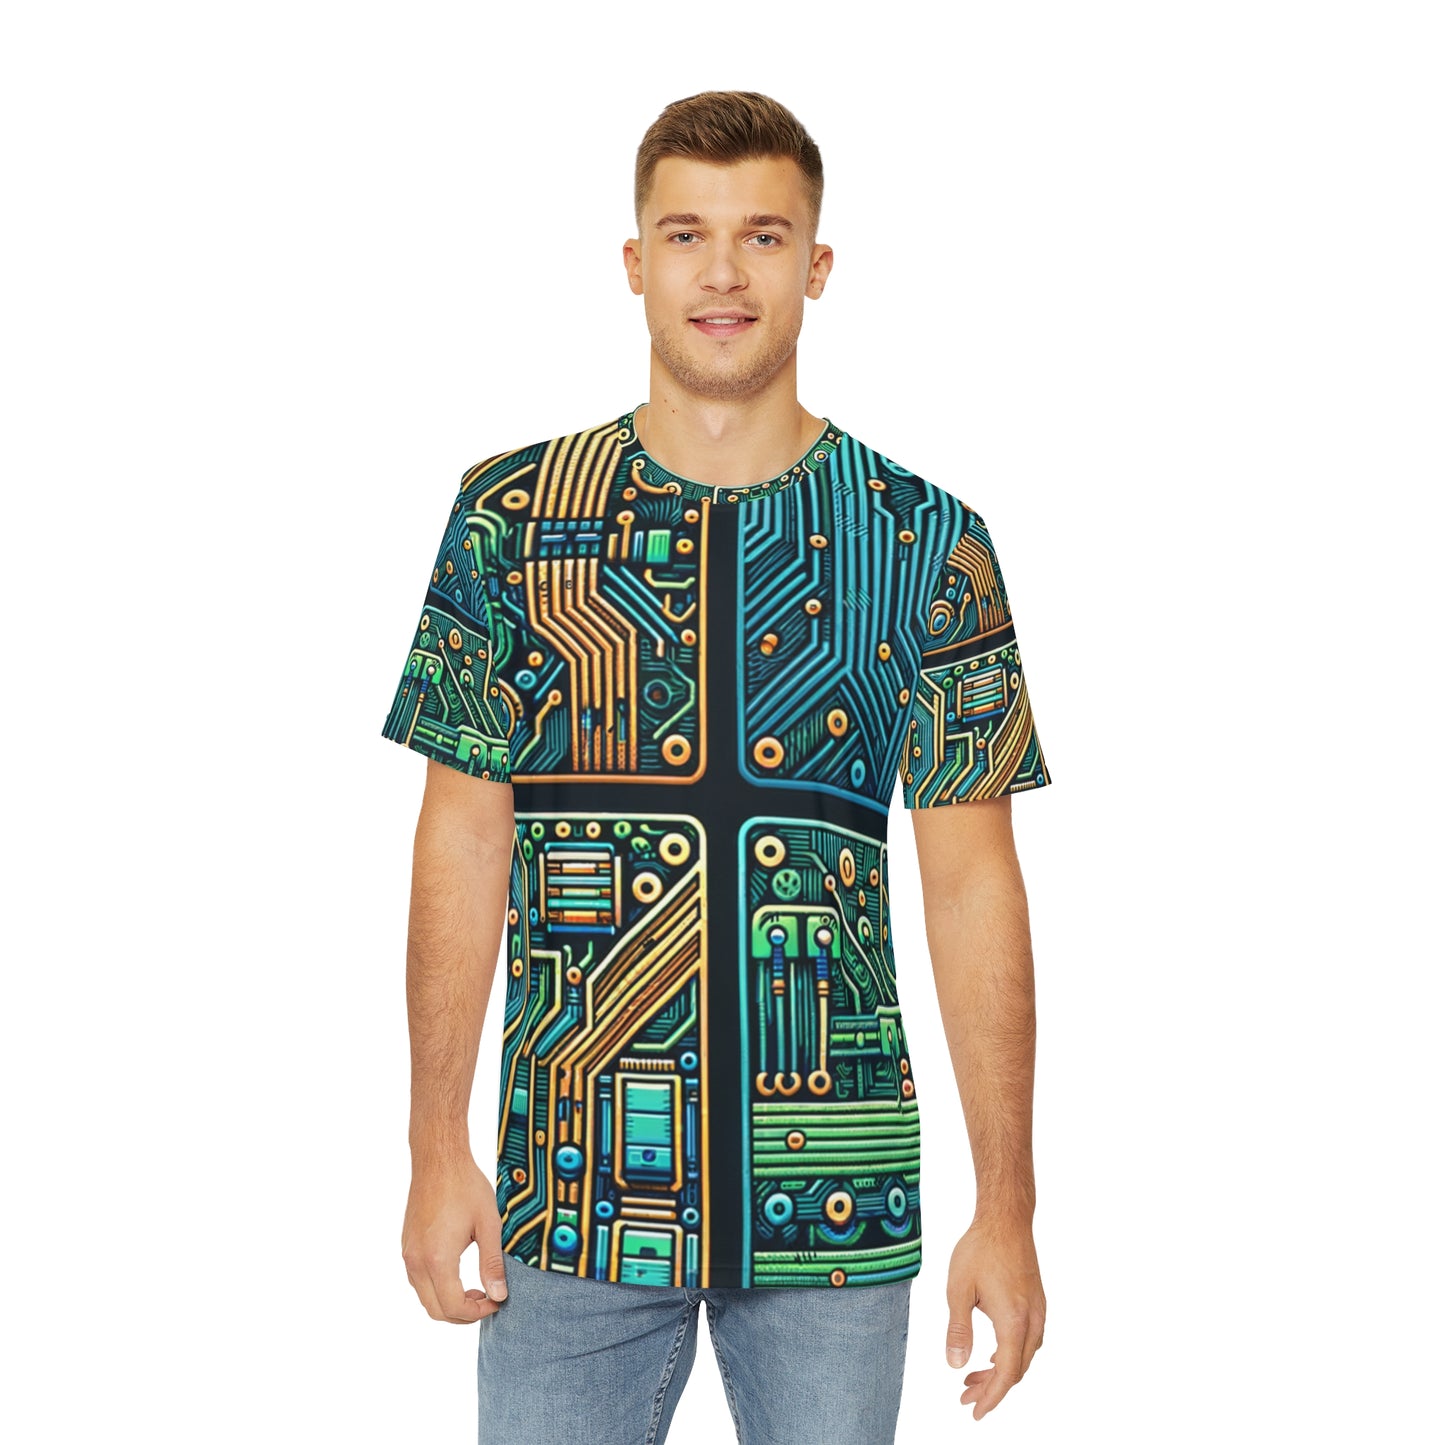 Front view of the Circuit Synapse Array Crewneck Pullover All-Over Print Short-Sleeved Shirt blue green yellow black white circuit pattern paired with casual denim pants worn by a white man